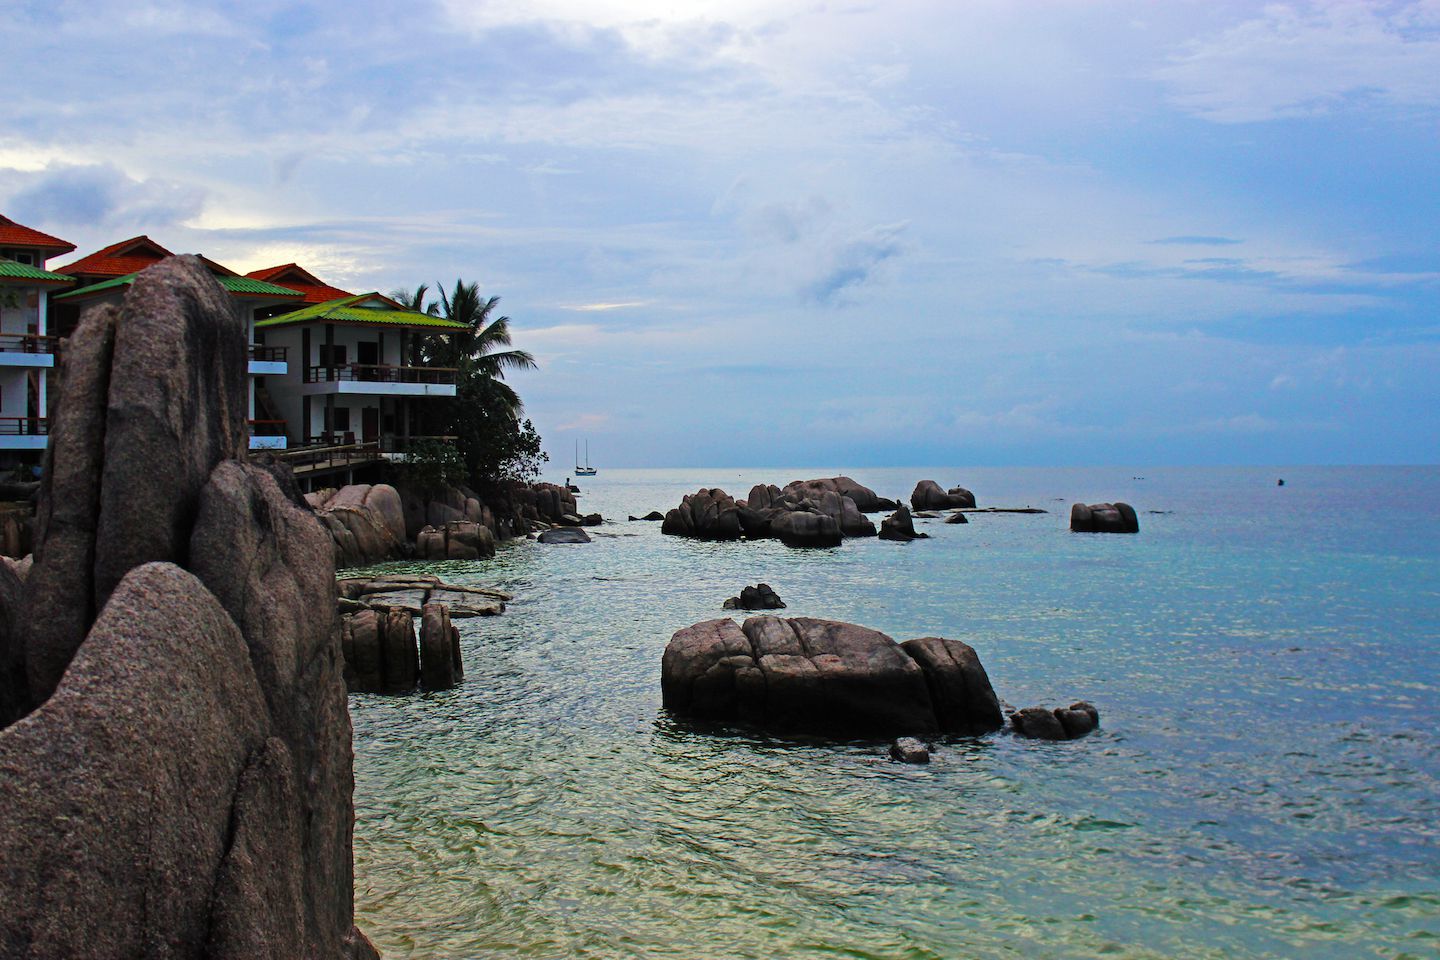 View of the beach front resort in Koh Tao, Thailand